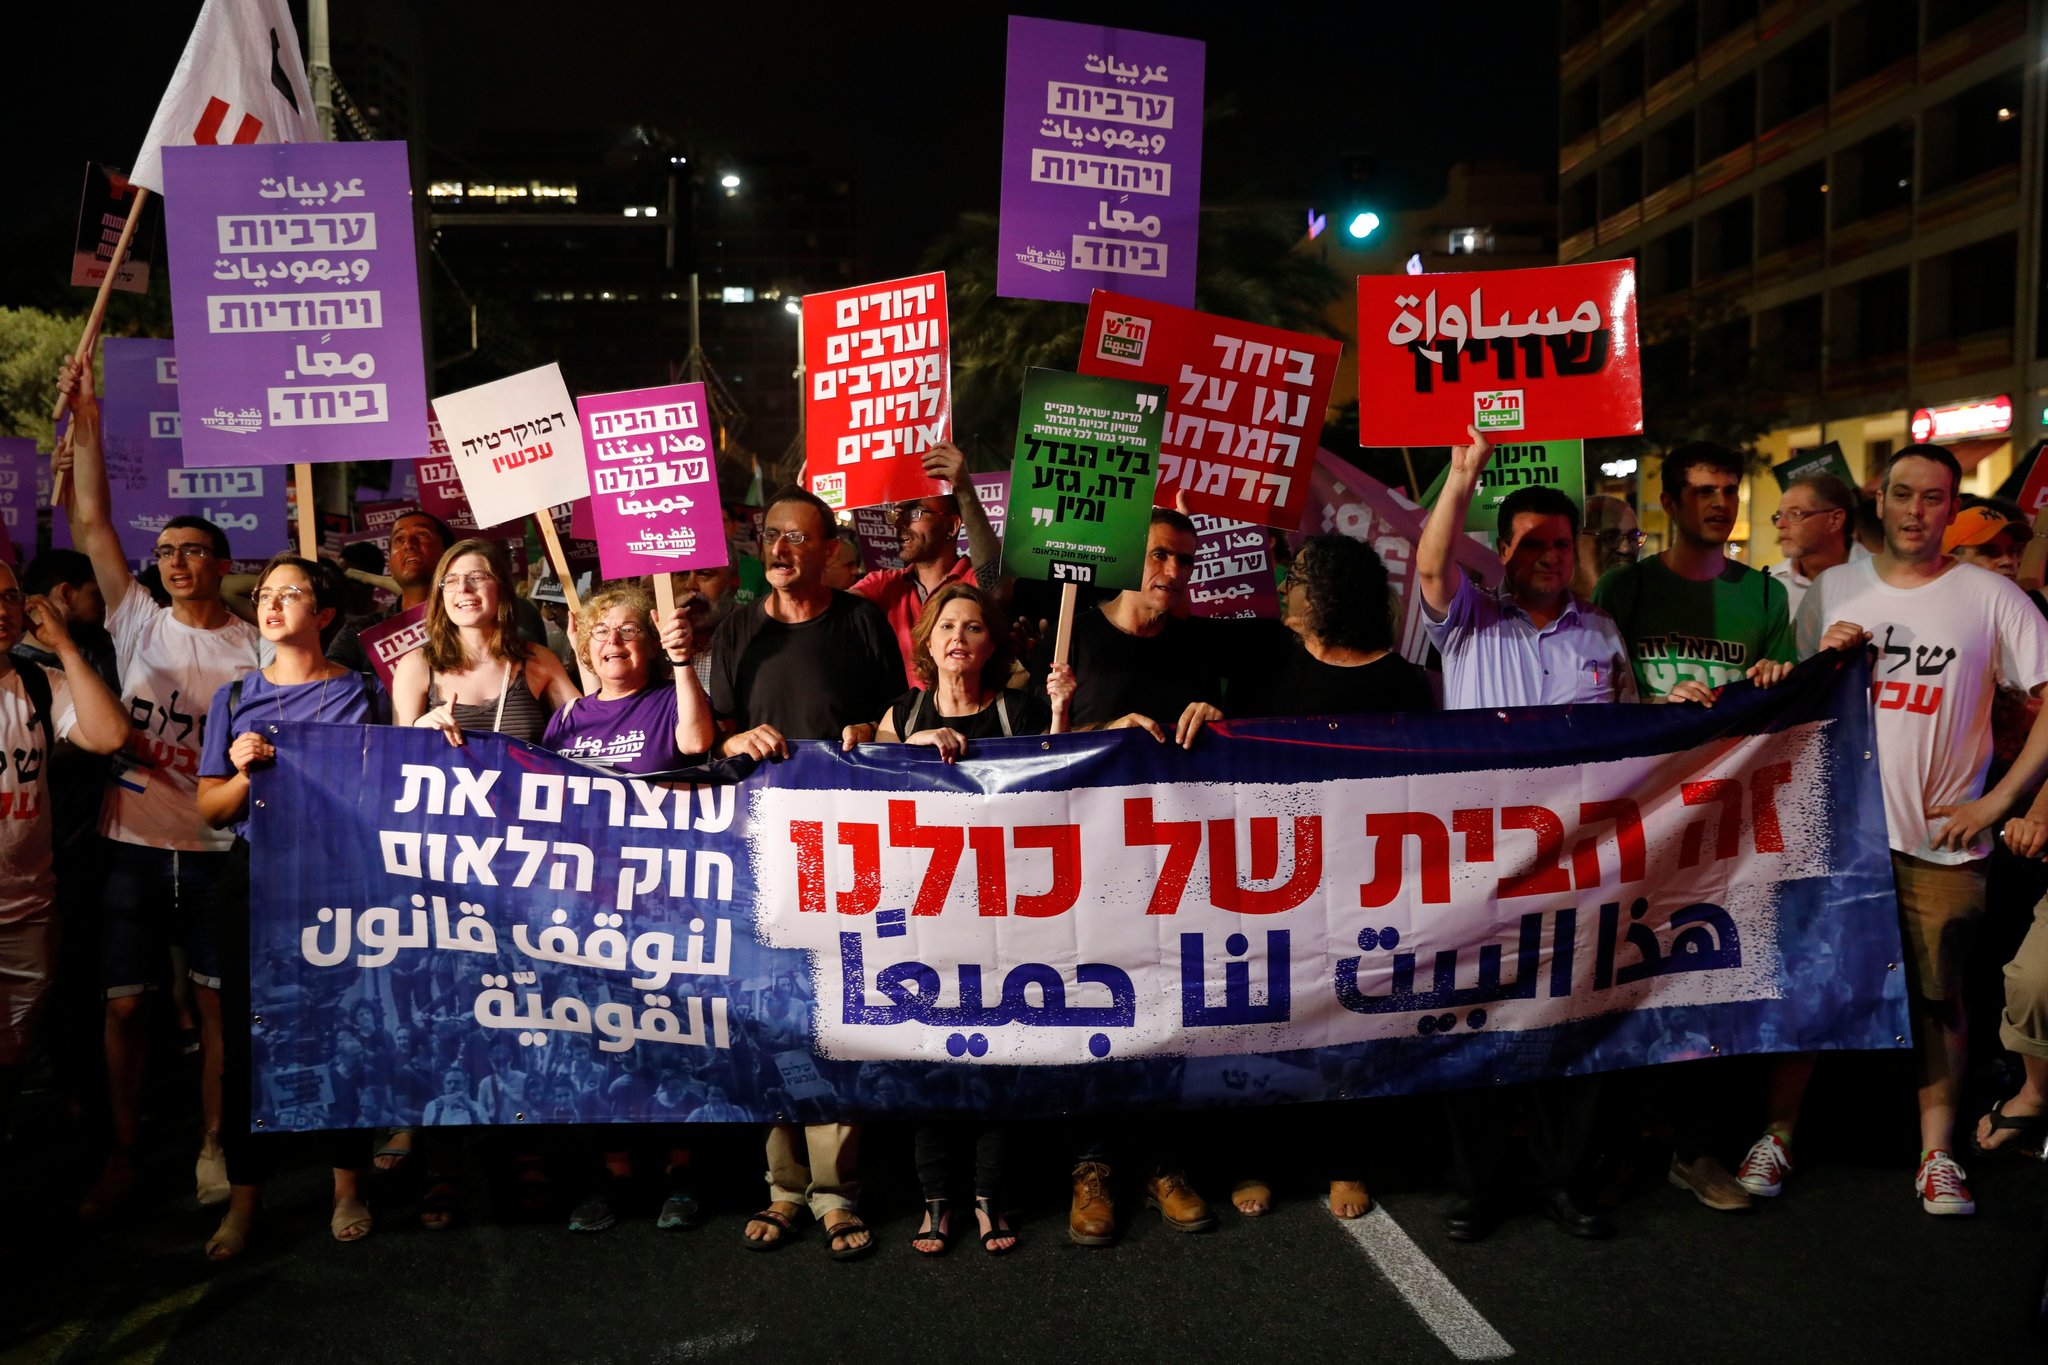 A protest in Tel Aviv this month against the new law (photo credit: Abir Sultan/European Pressphoto Agency)